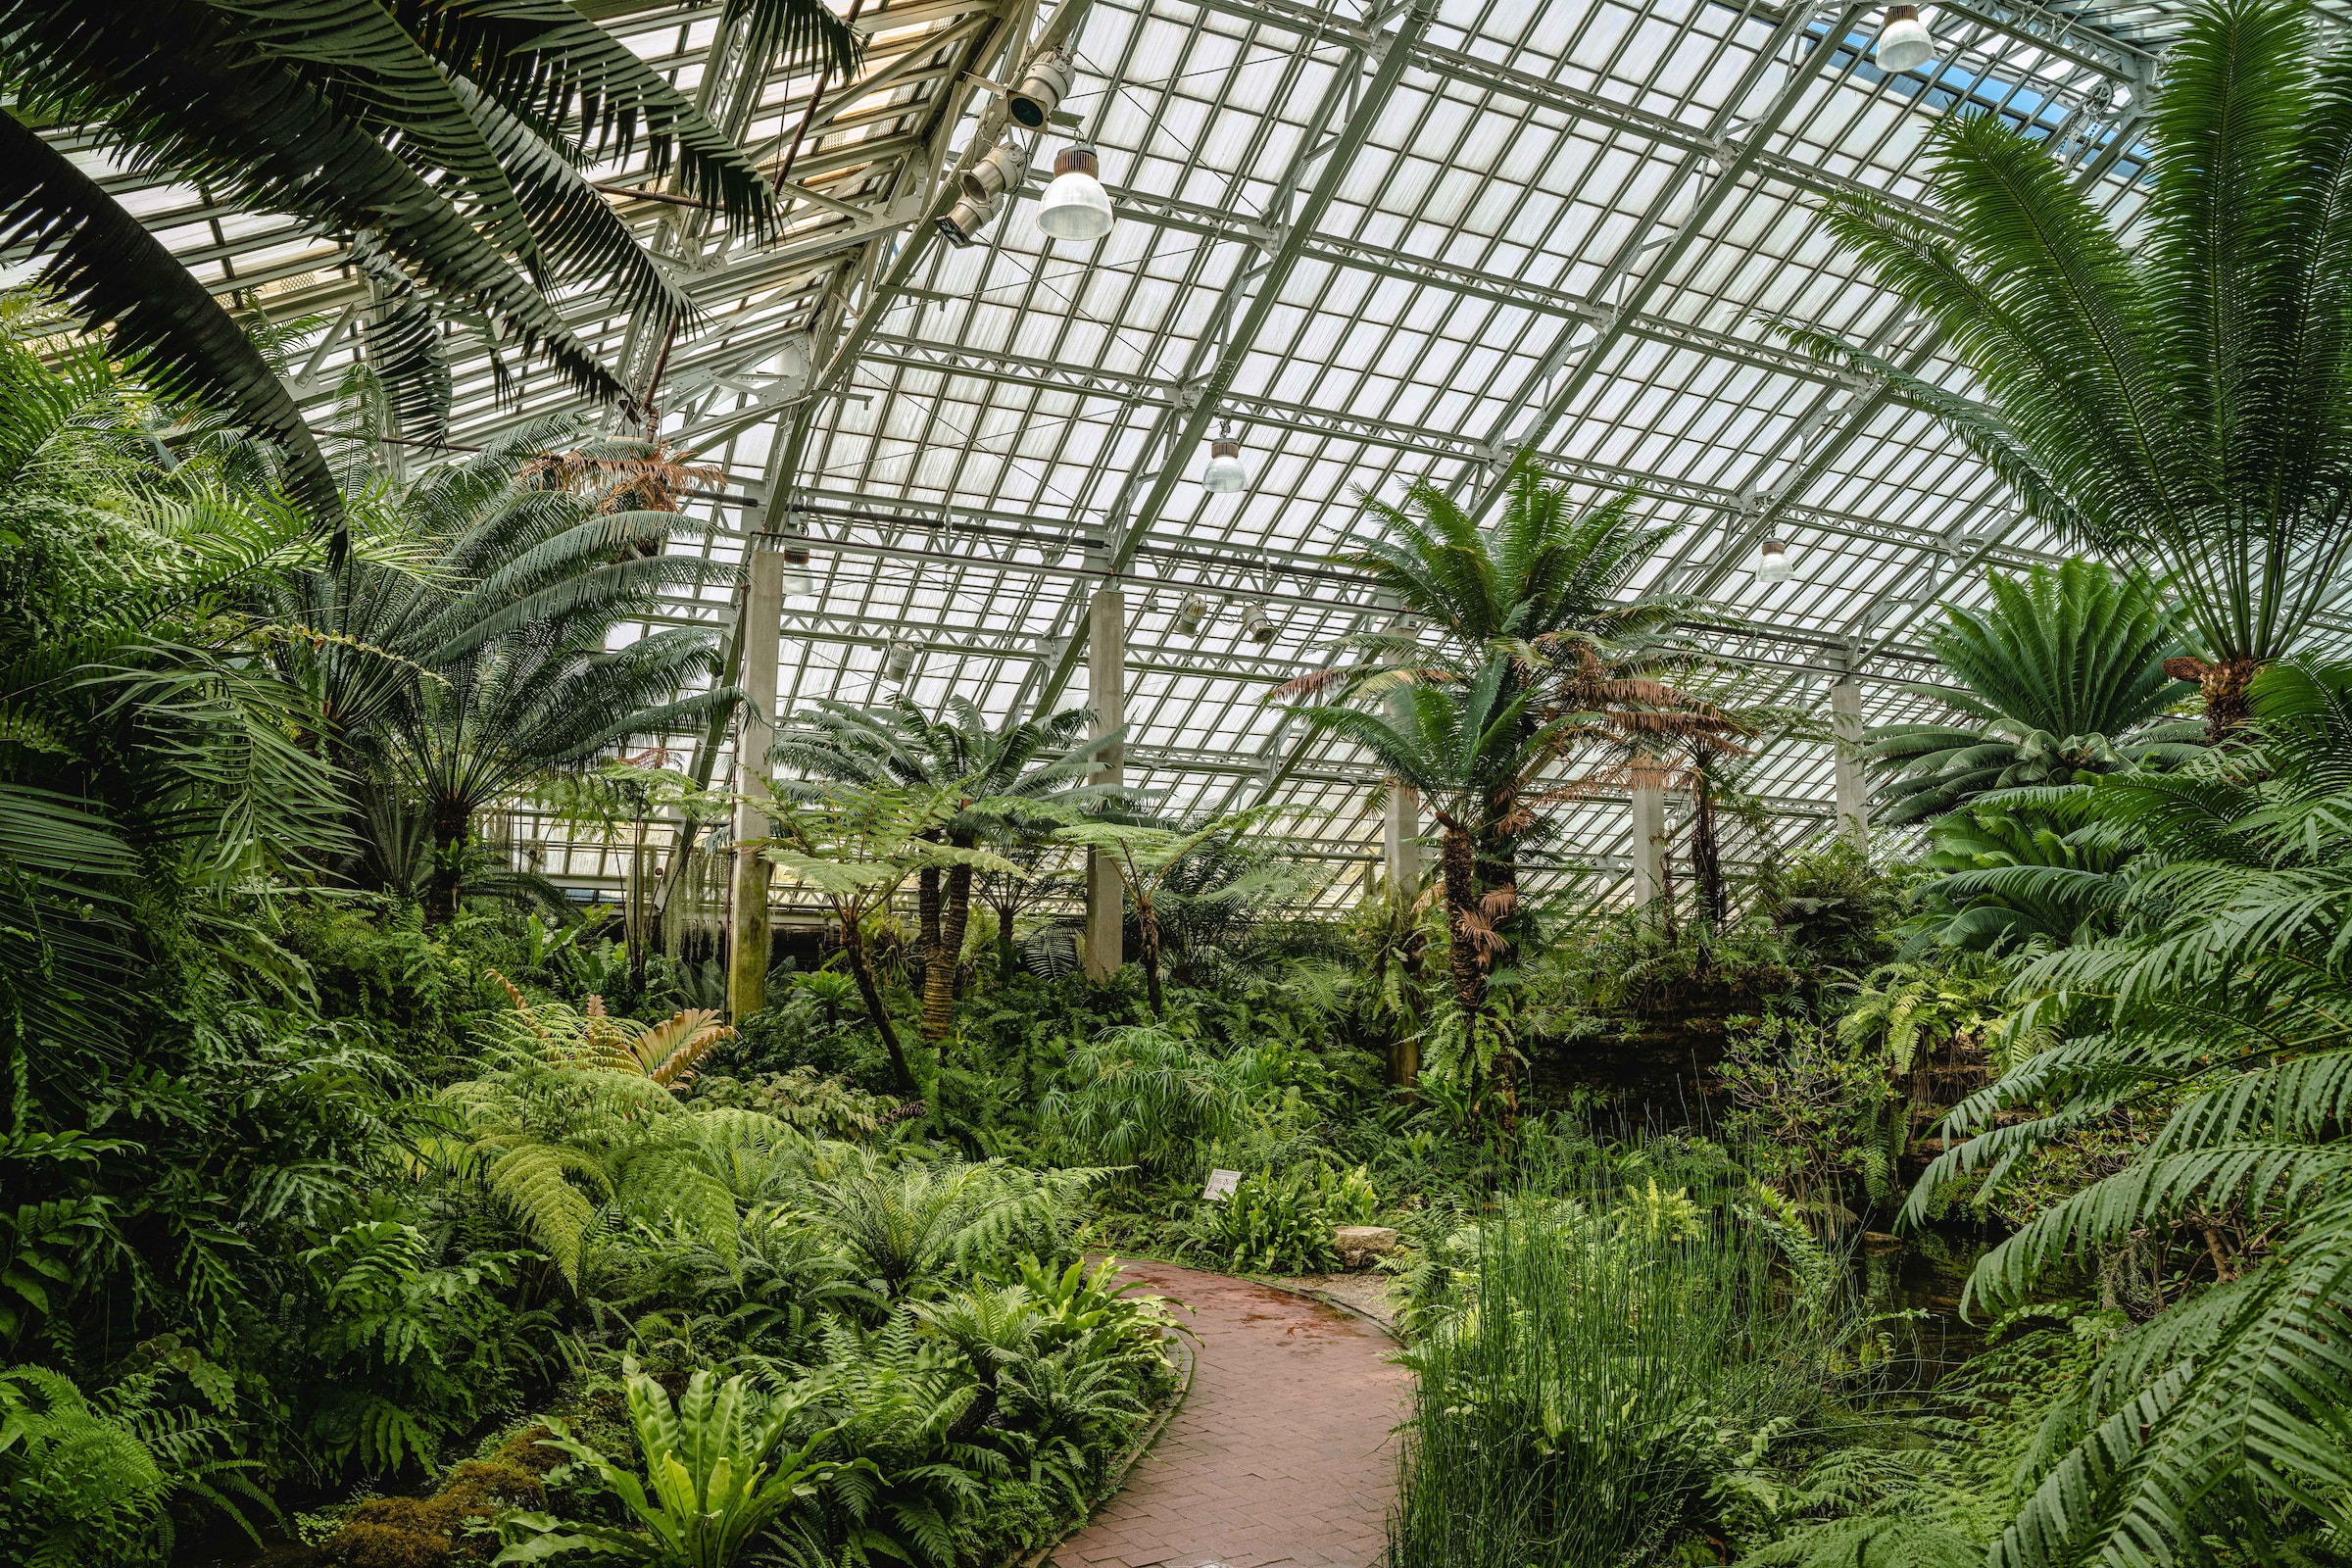 The Garfield Park Conservatory